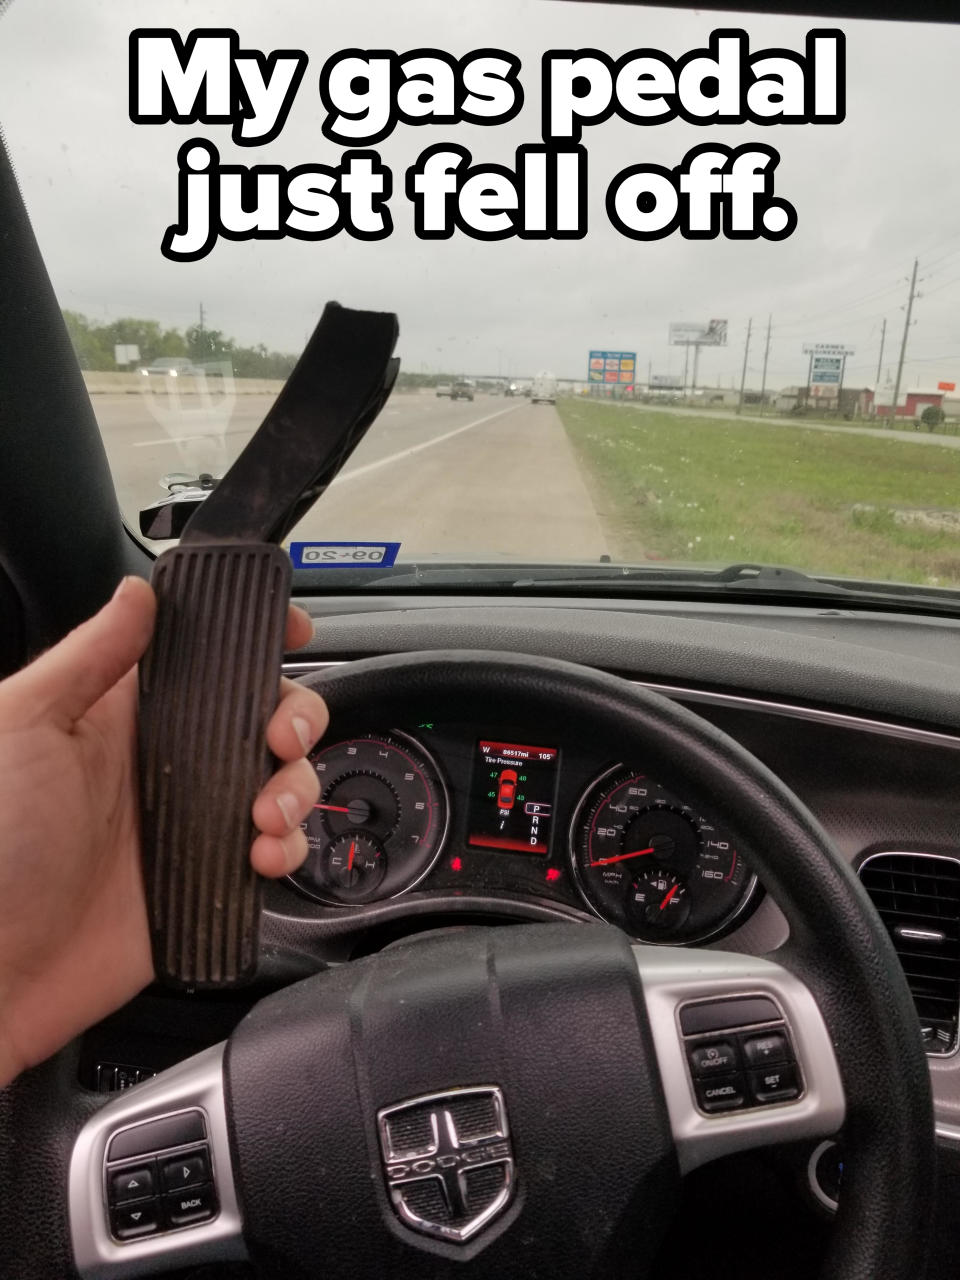 "My gas pedal just fell off": A person holding up a gas pedal in the driver's seat